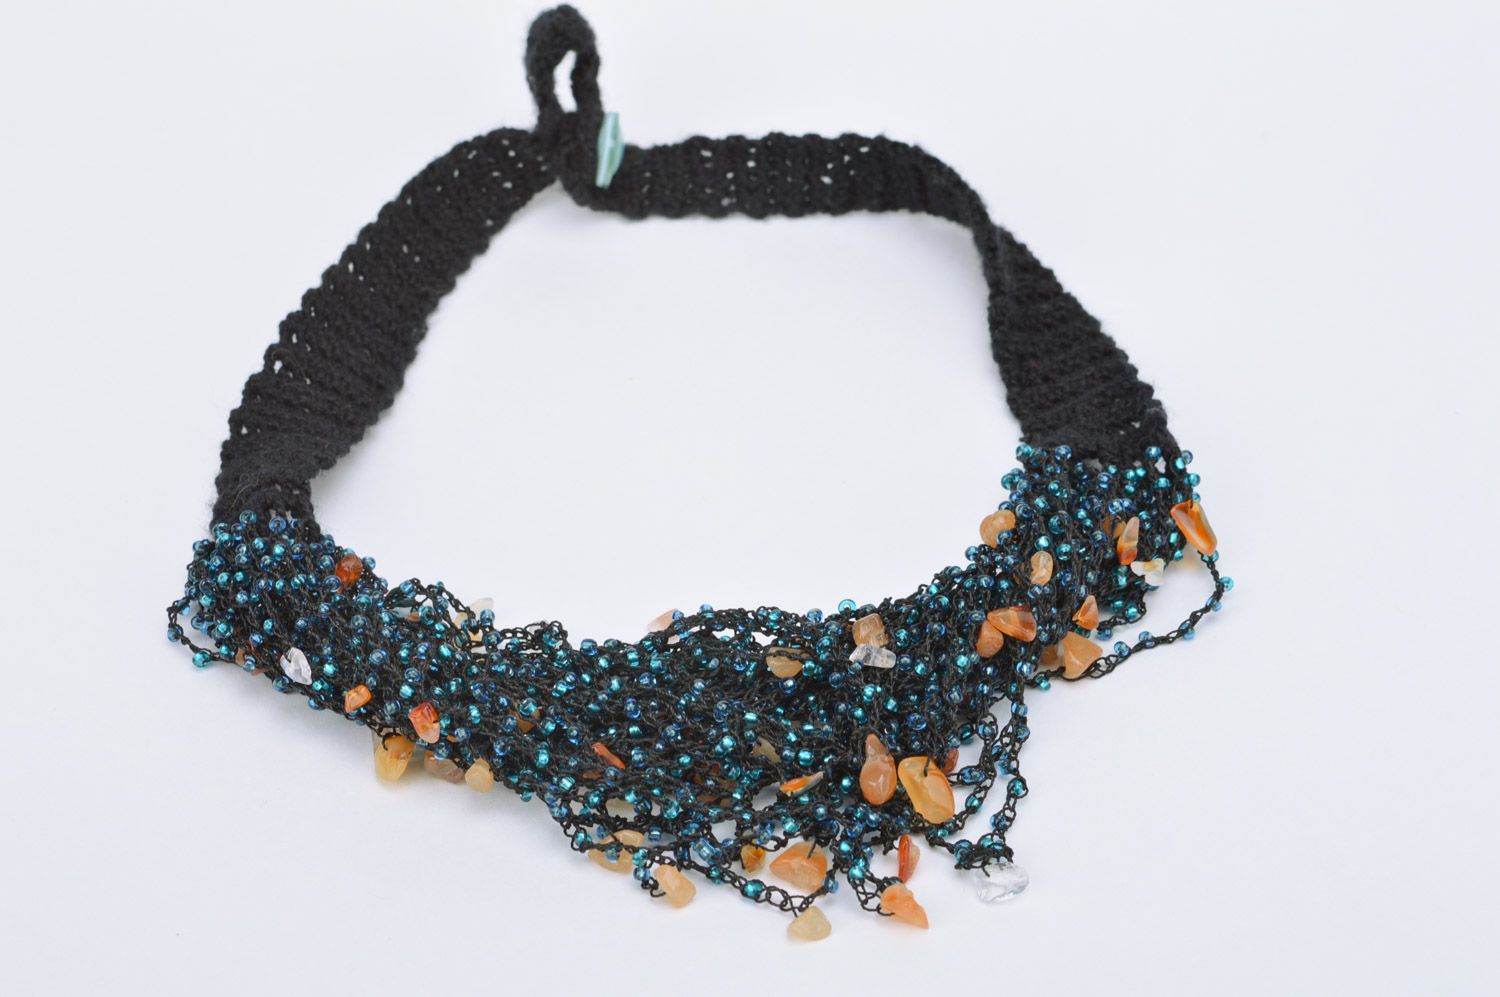 Handmade elegant black necklace woven of threads and beads with button fastener photo 2